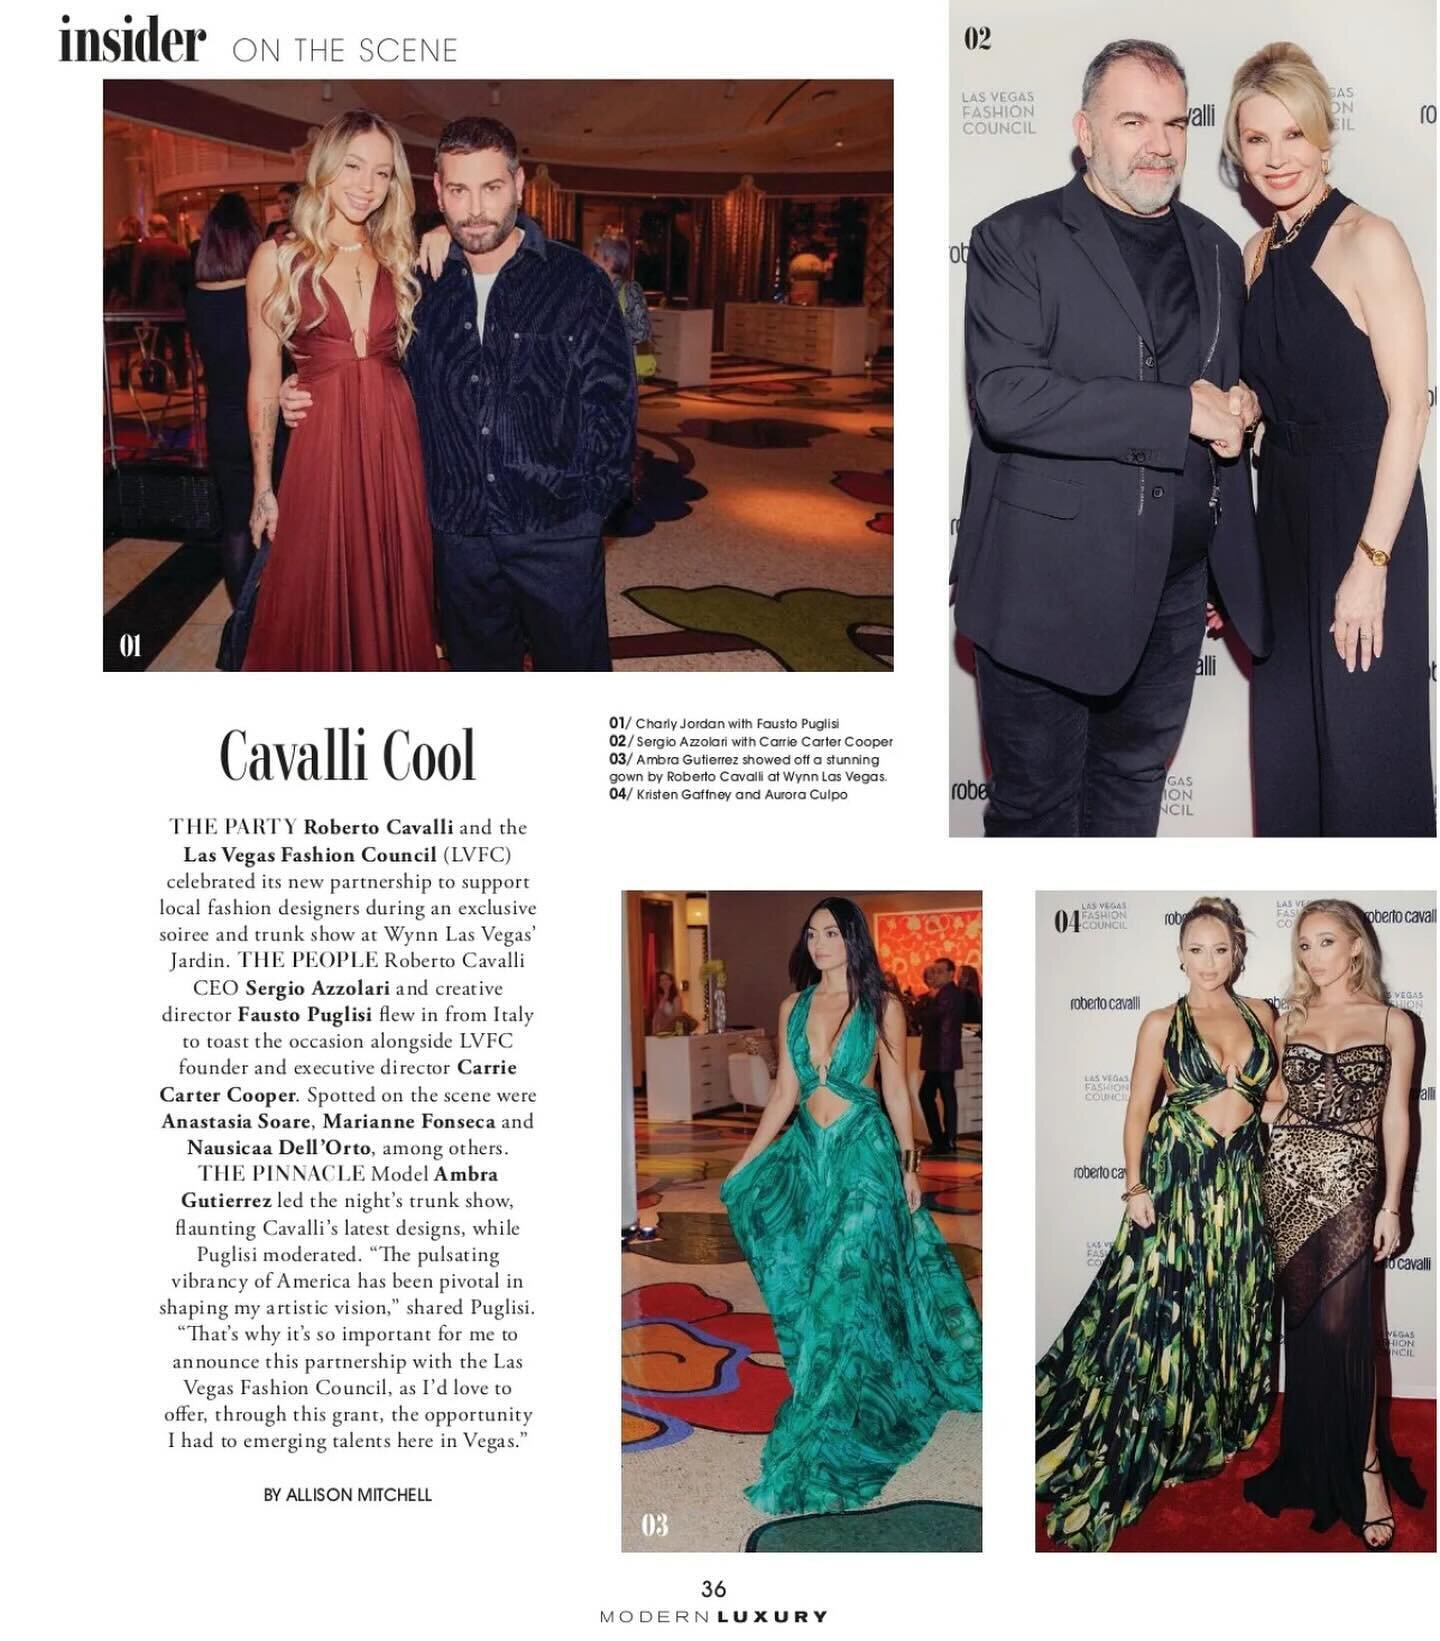 🤩 Thank you @vegasmagazine for featuring us! ✨

We are so grateful for our partnership with Roberto Cavalli during this exclusive soiree and trunk show at Wynn Las Vegas&rsquo; Jardin. Sales from this event will further support our community by crea